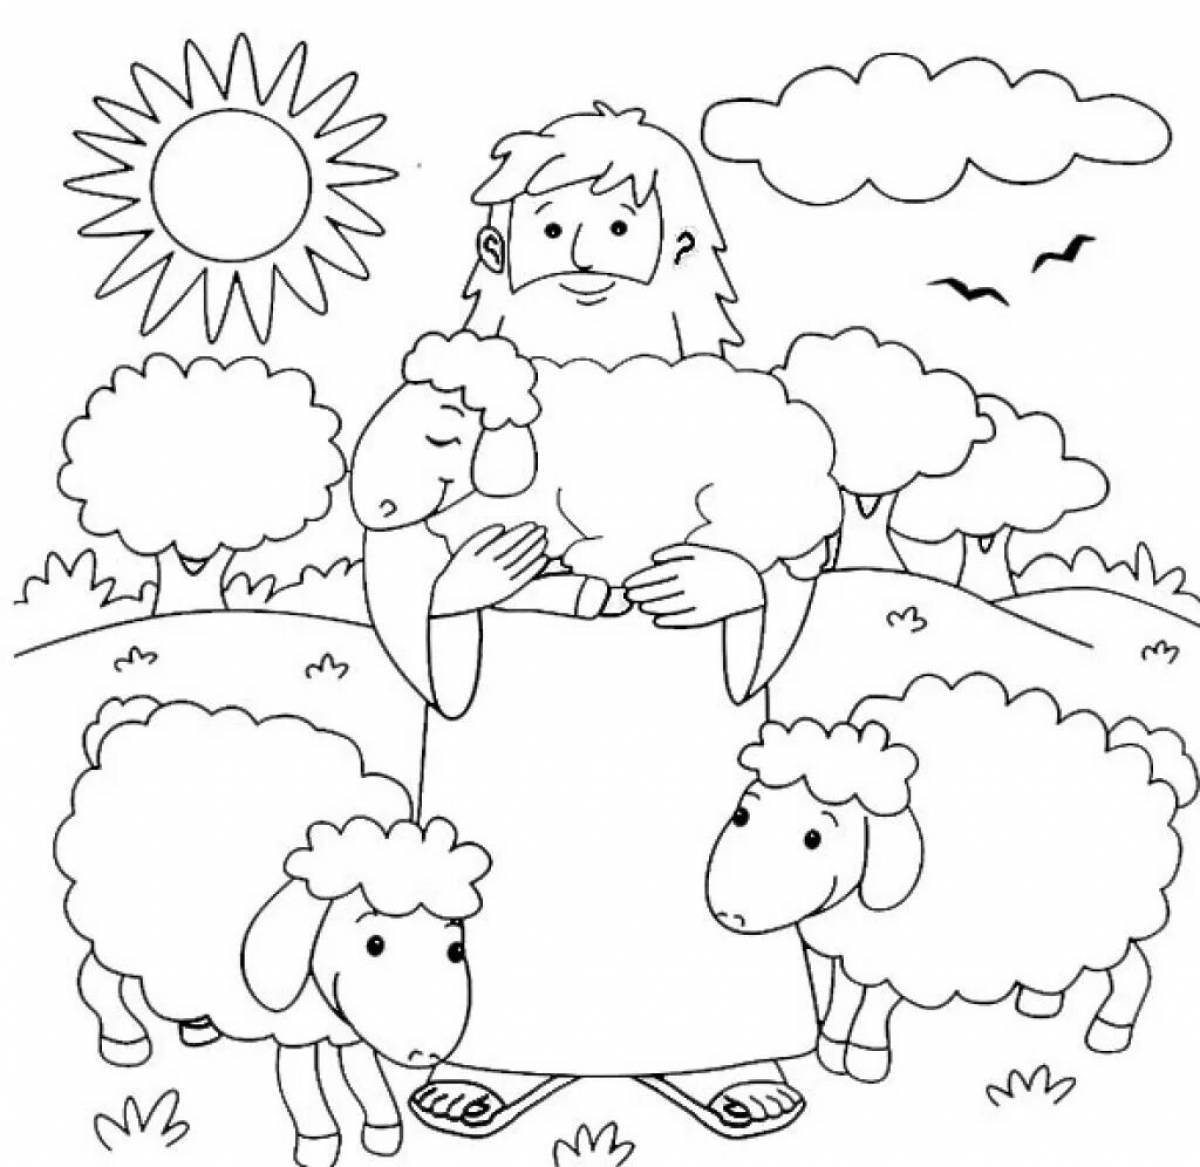 Christian for kids soulful coloring book